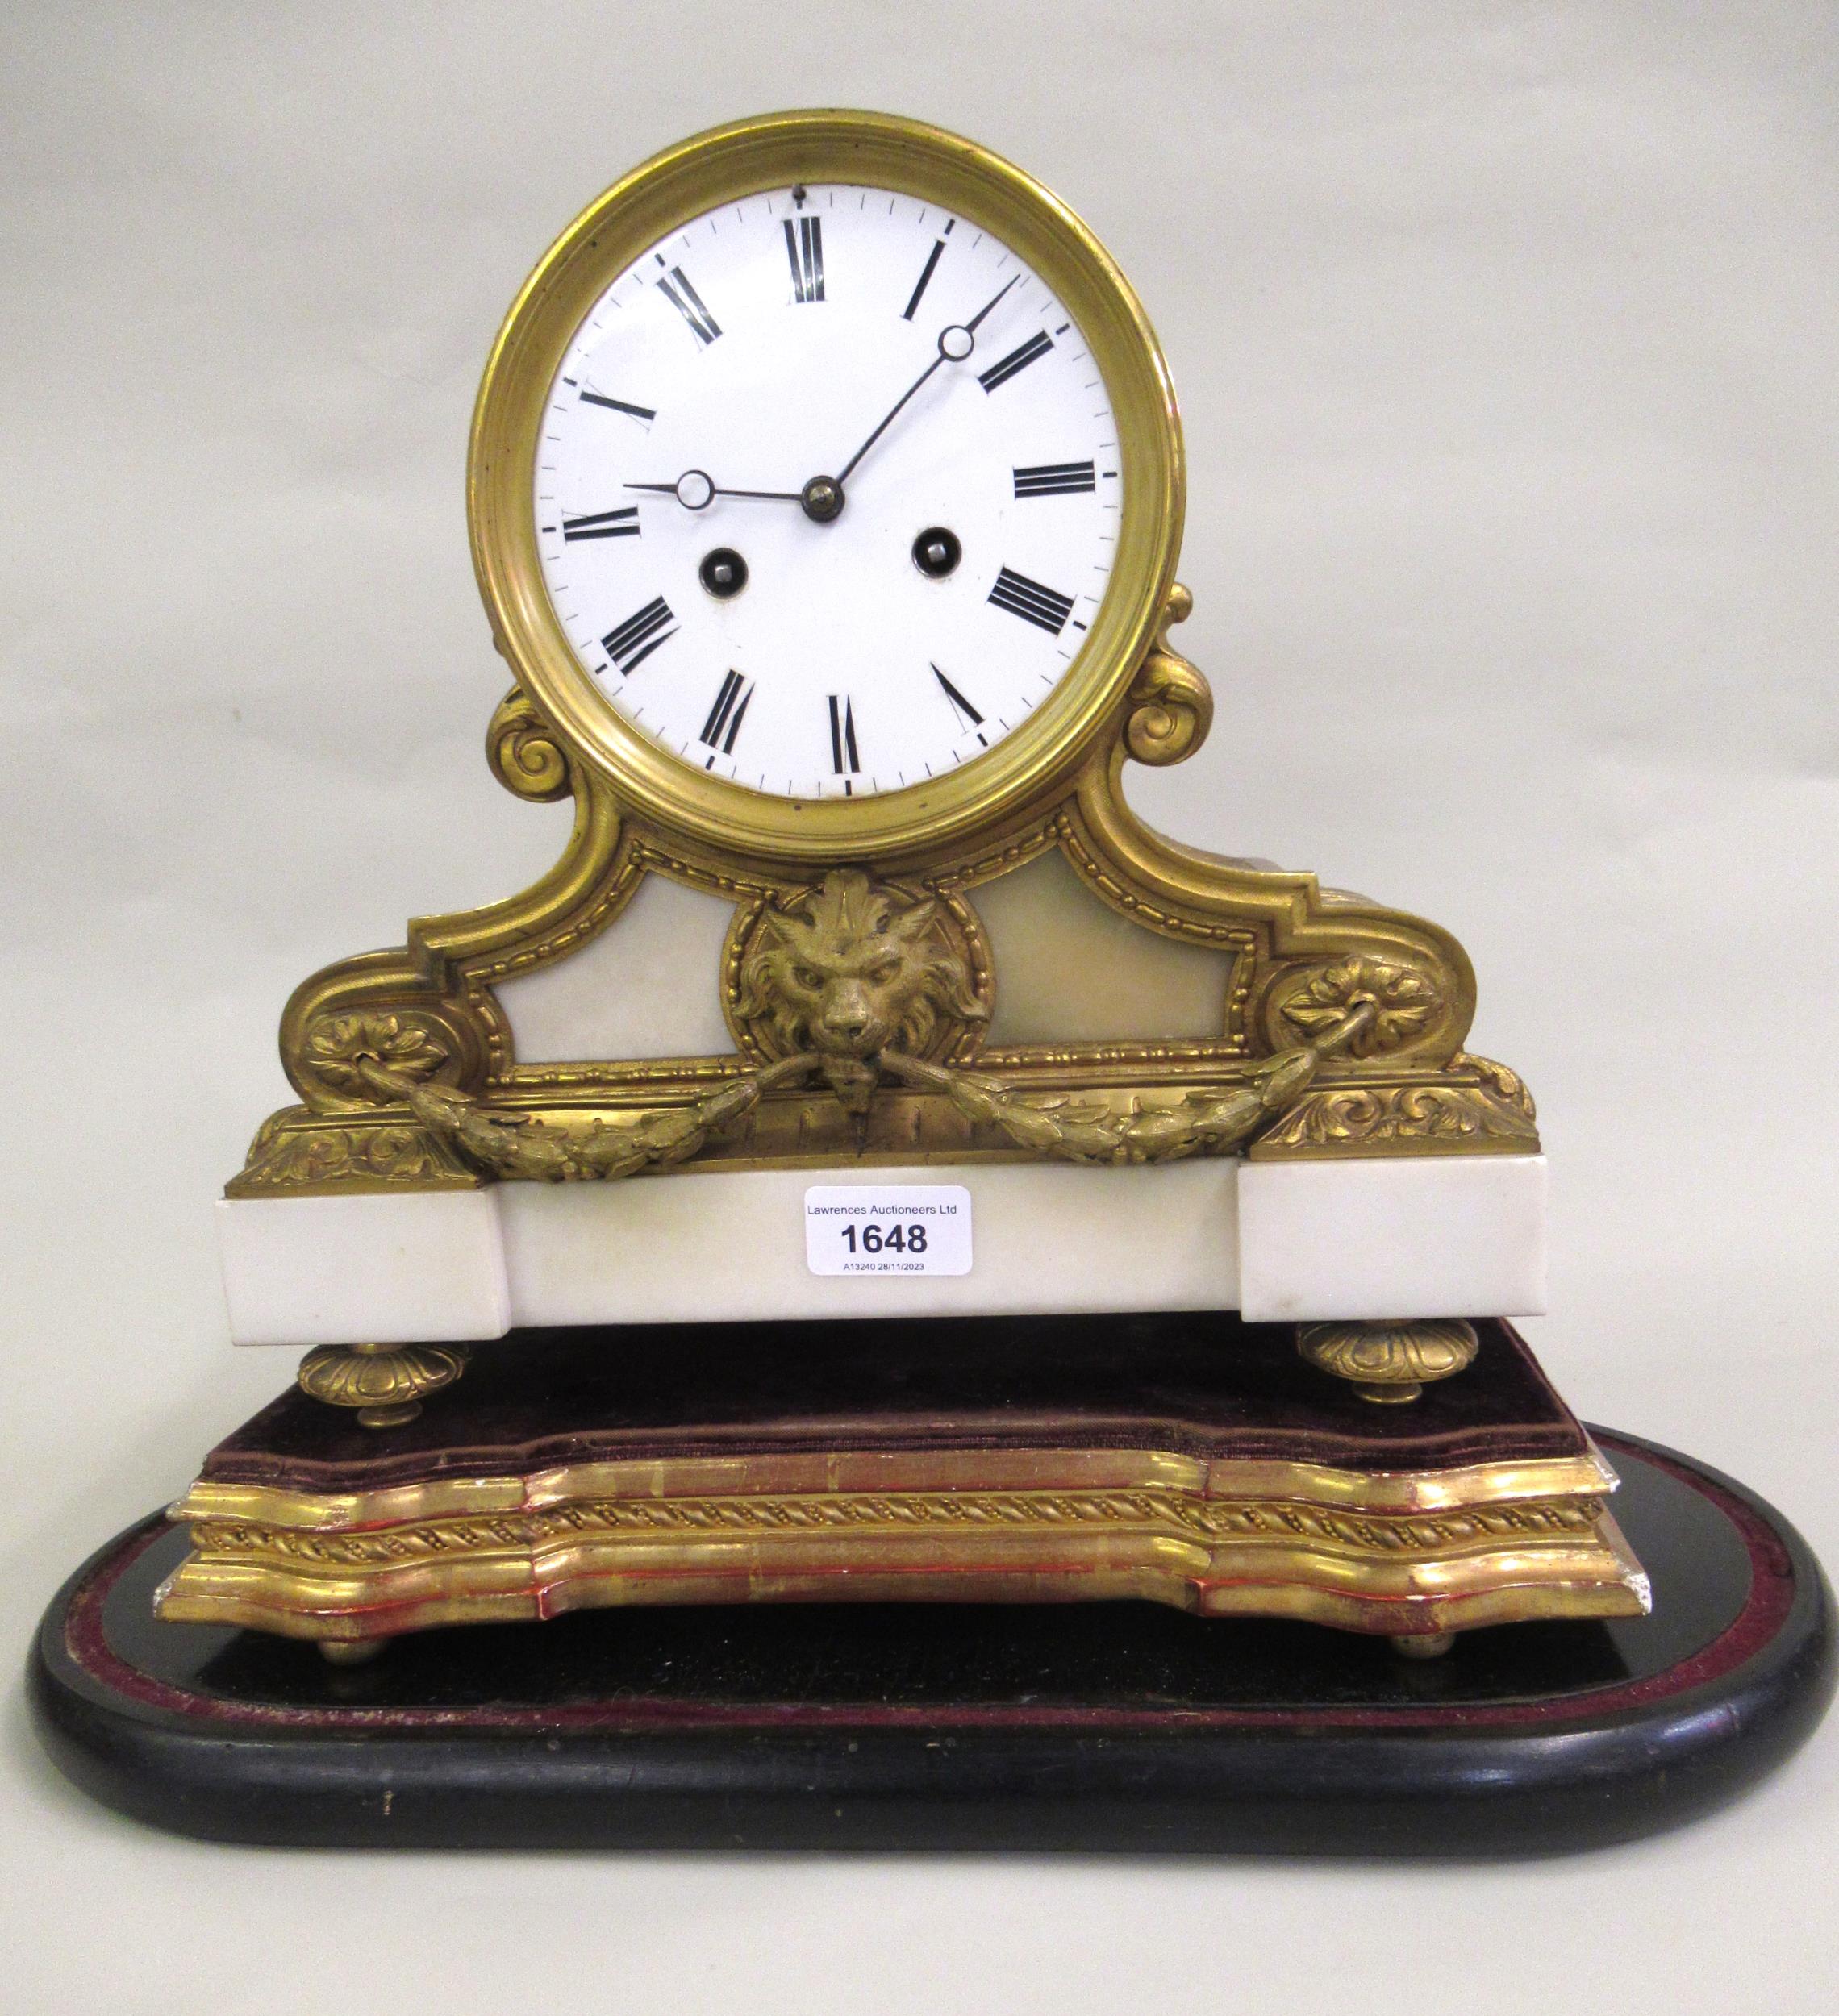 Good quality French ormulo and white marble mantel clock, having circular white enamel dial with